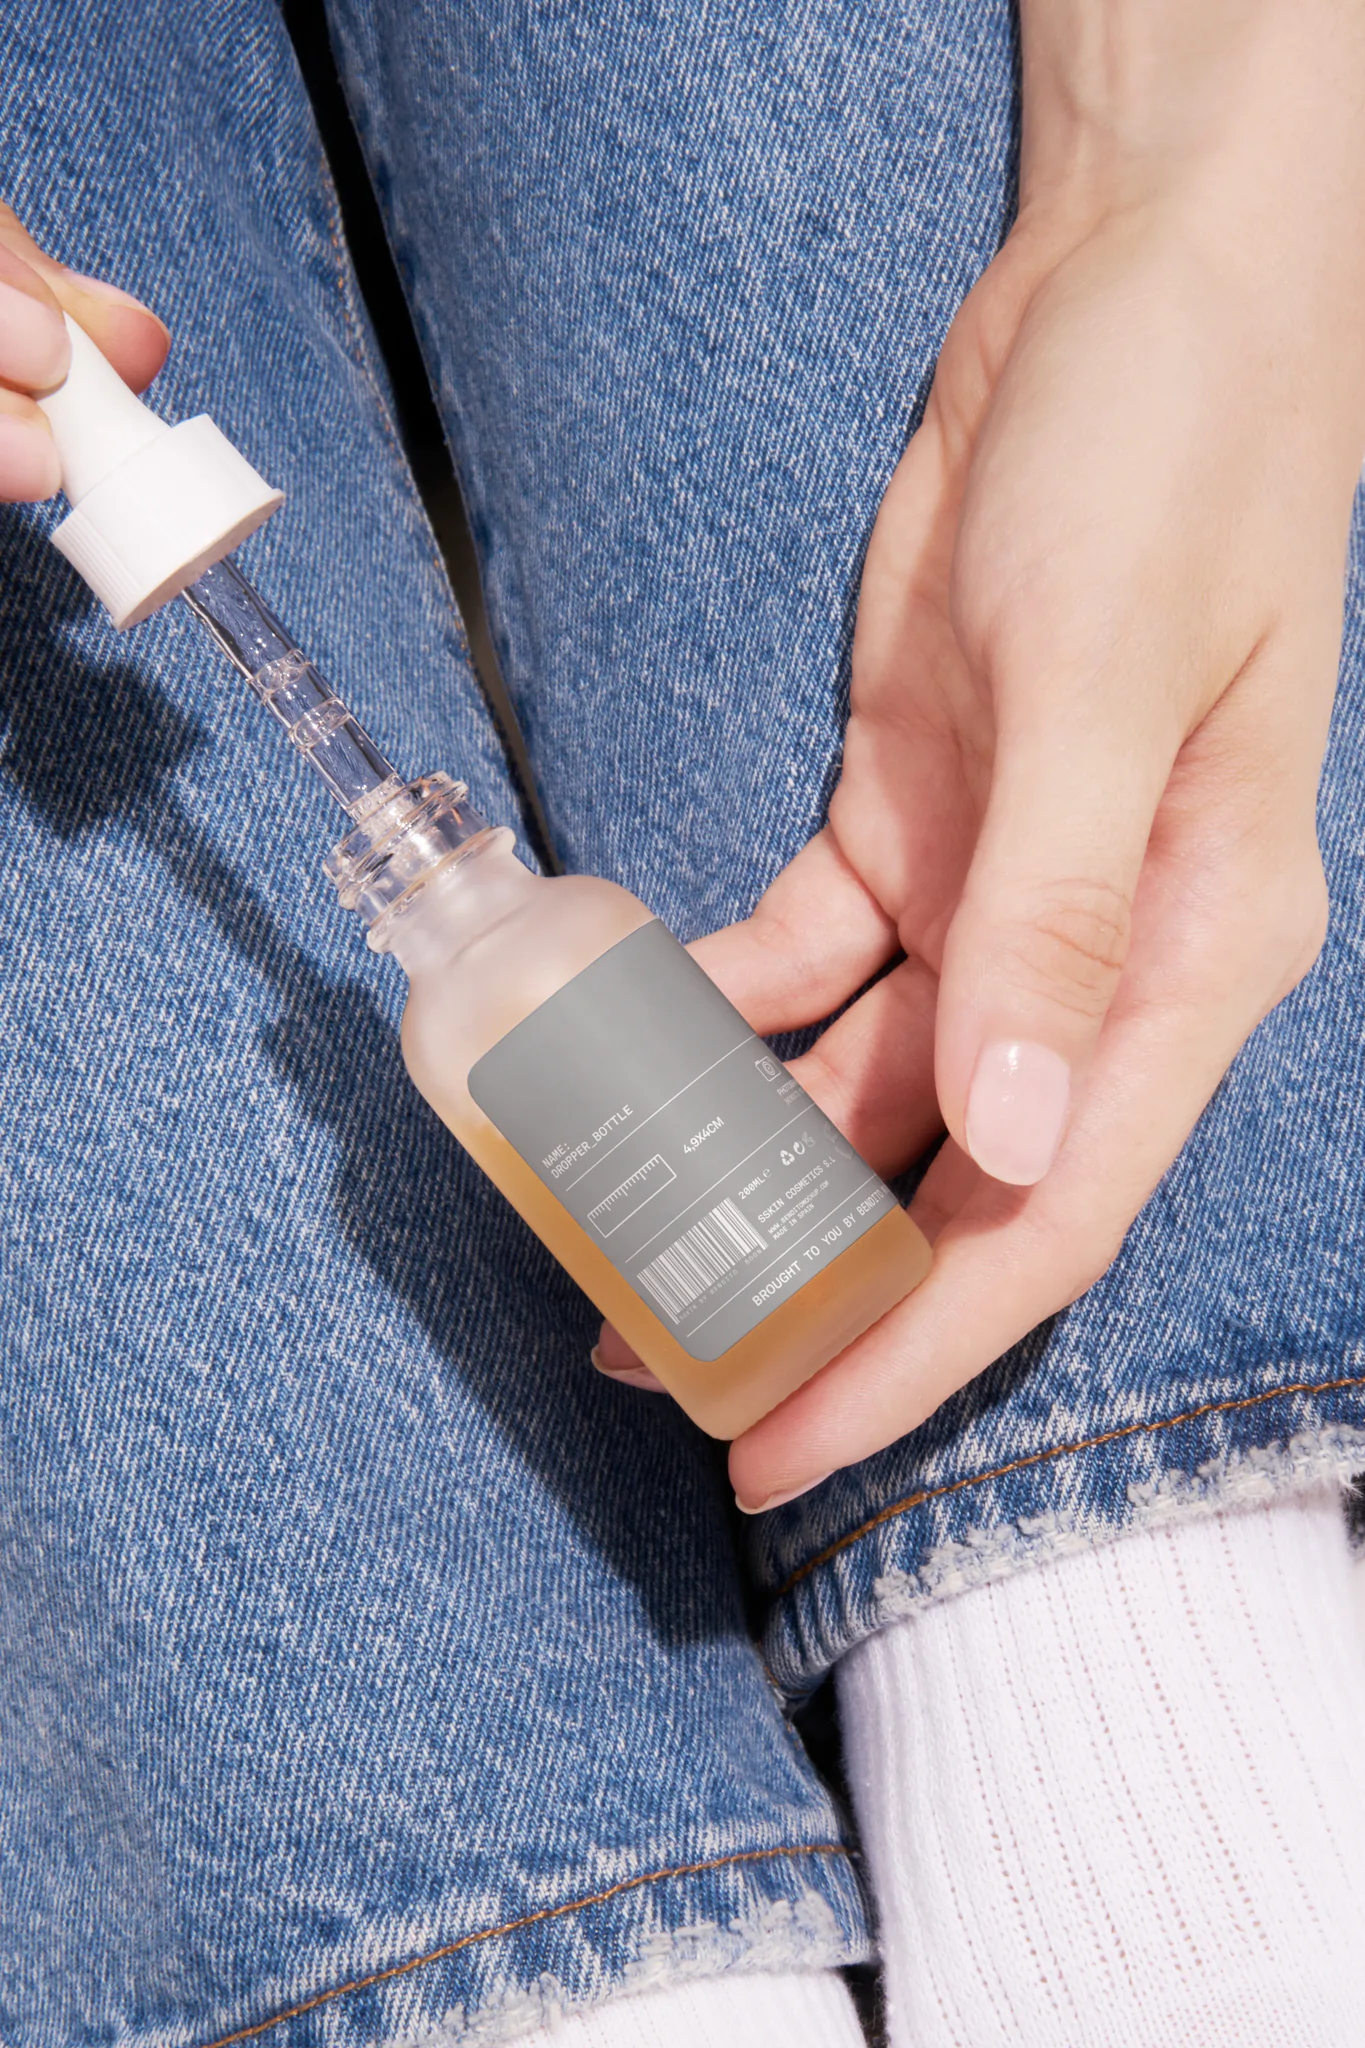 Woman with jeans holding a dropper bottle mockup. Skin care packaging mockup. Skin care PSD file. High-quality dropper bottle mockup.